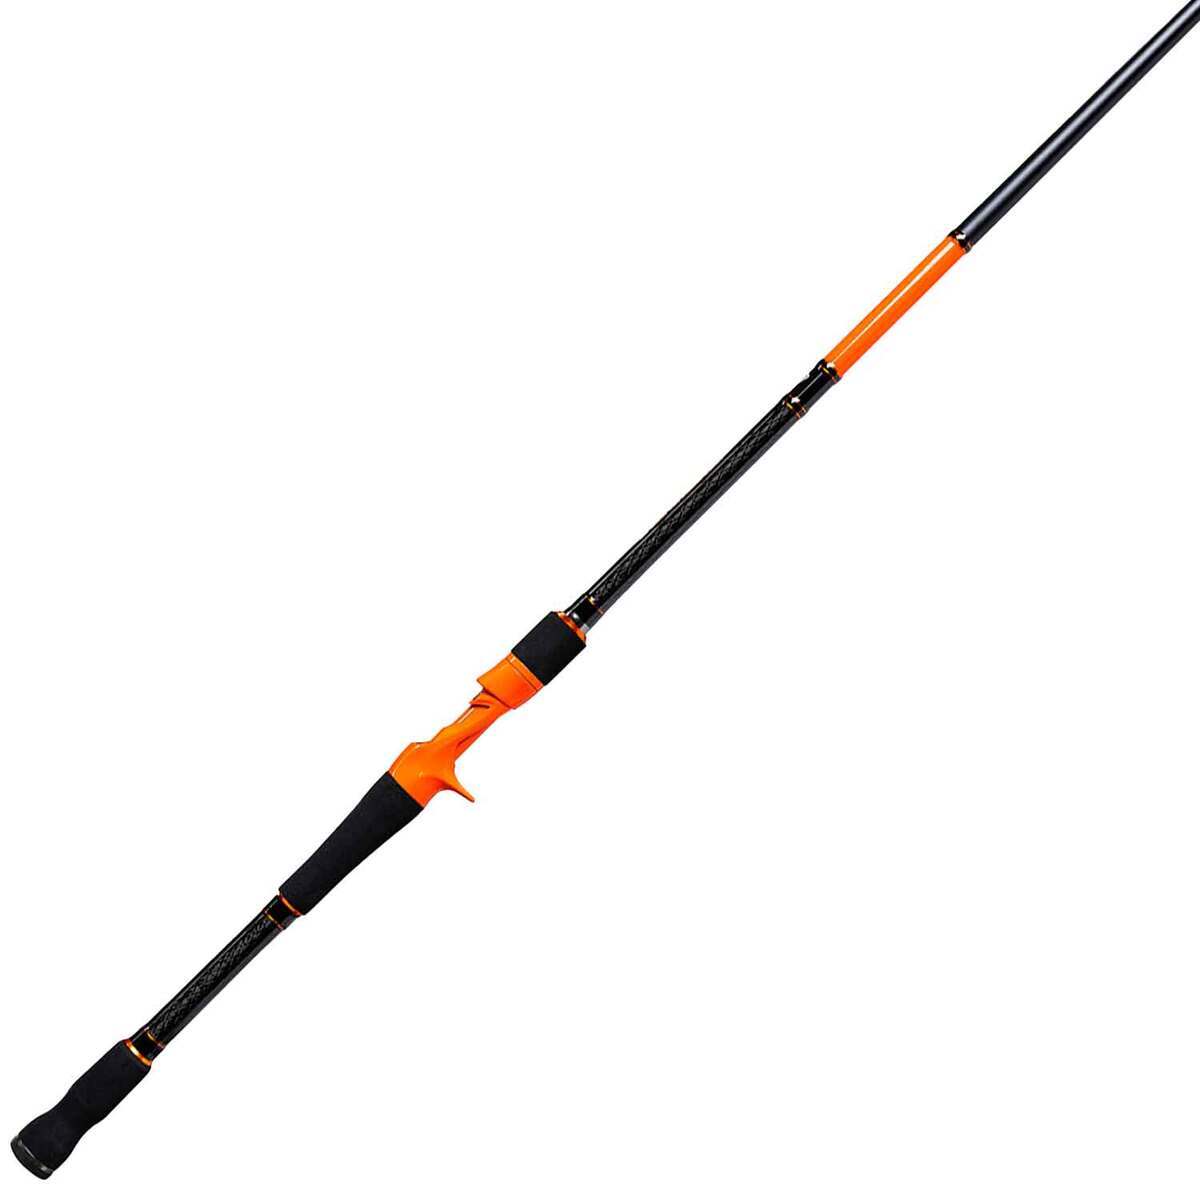 Favorite Fishing USA Balance Casting Rod - 7ft 6in, Heavy Power, Moderate  Fast, 1pc